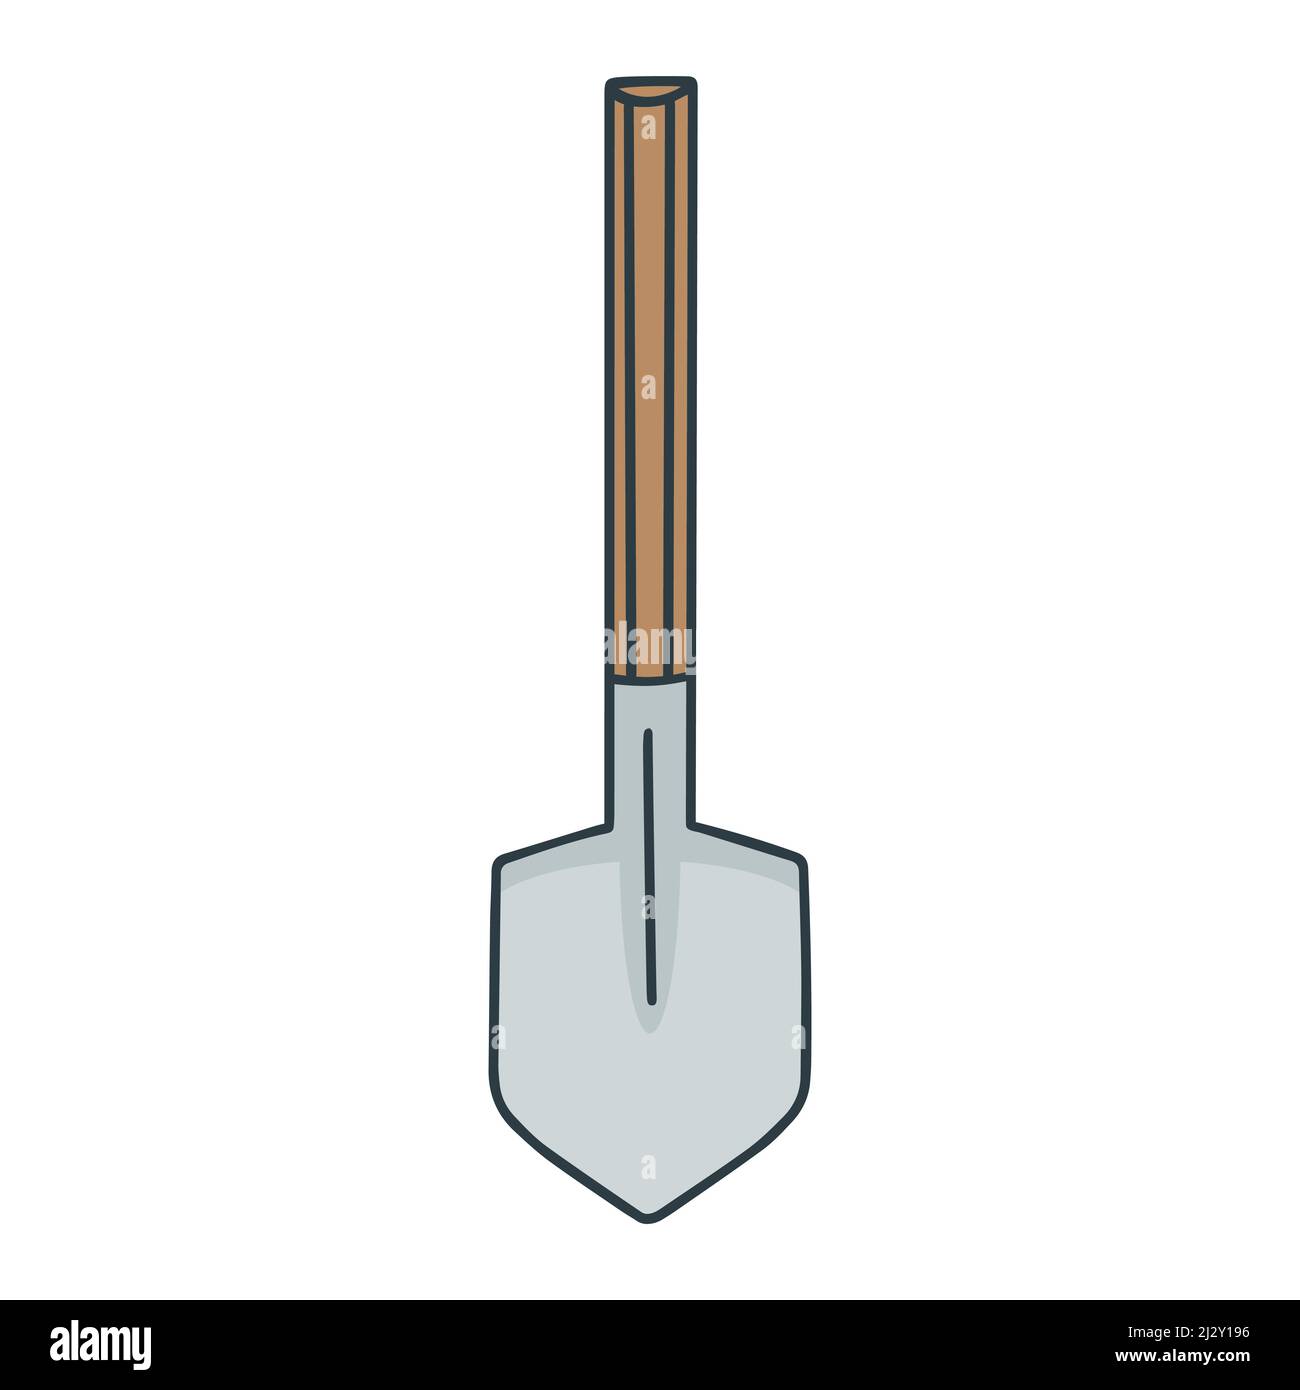 Shovel doodle style isolated vector illustration. Garden and construction equipment. Metal tool with wooden handle cartoon Stock Vector